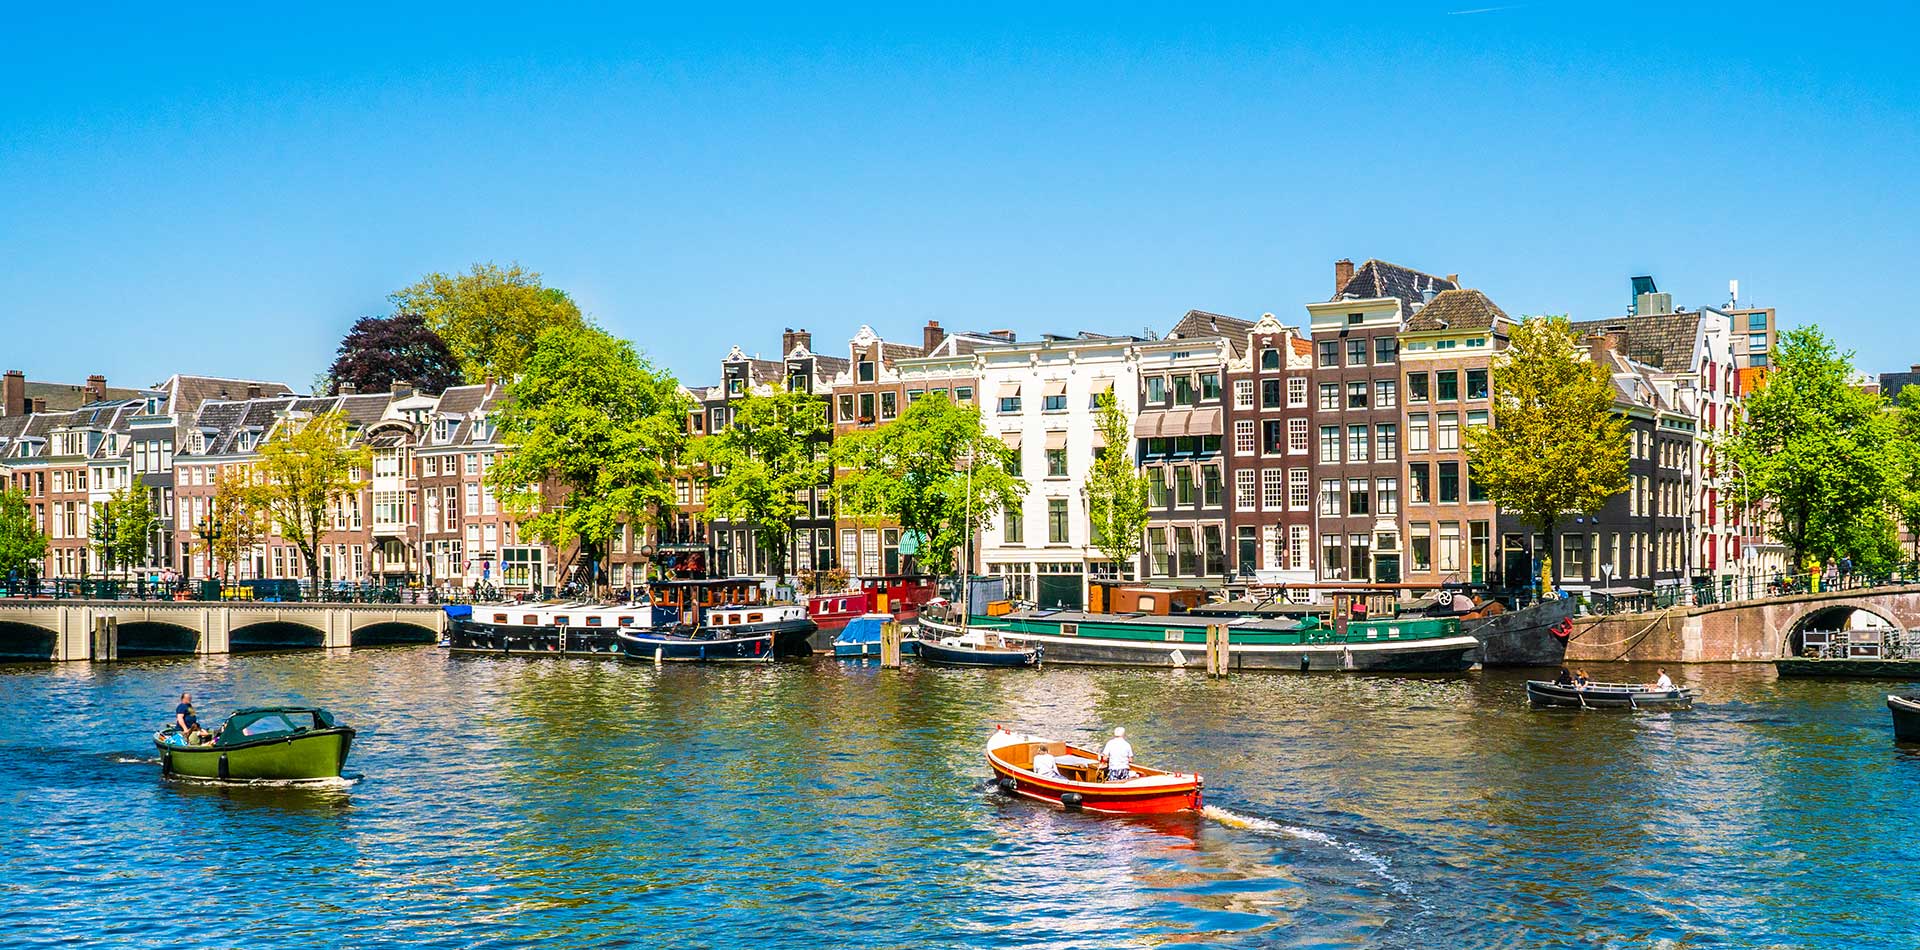 Views of Canals in Amsterdam, Netherlands